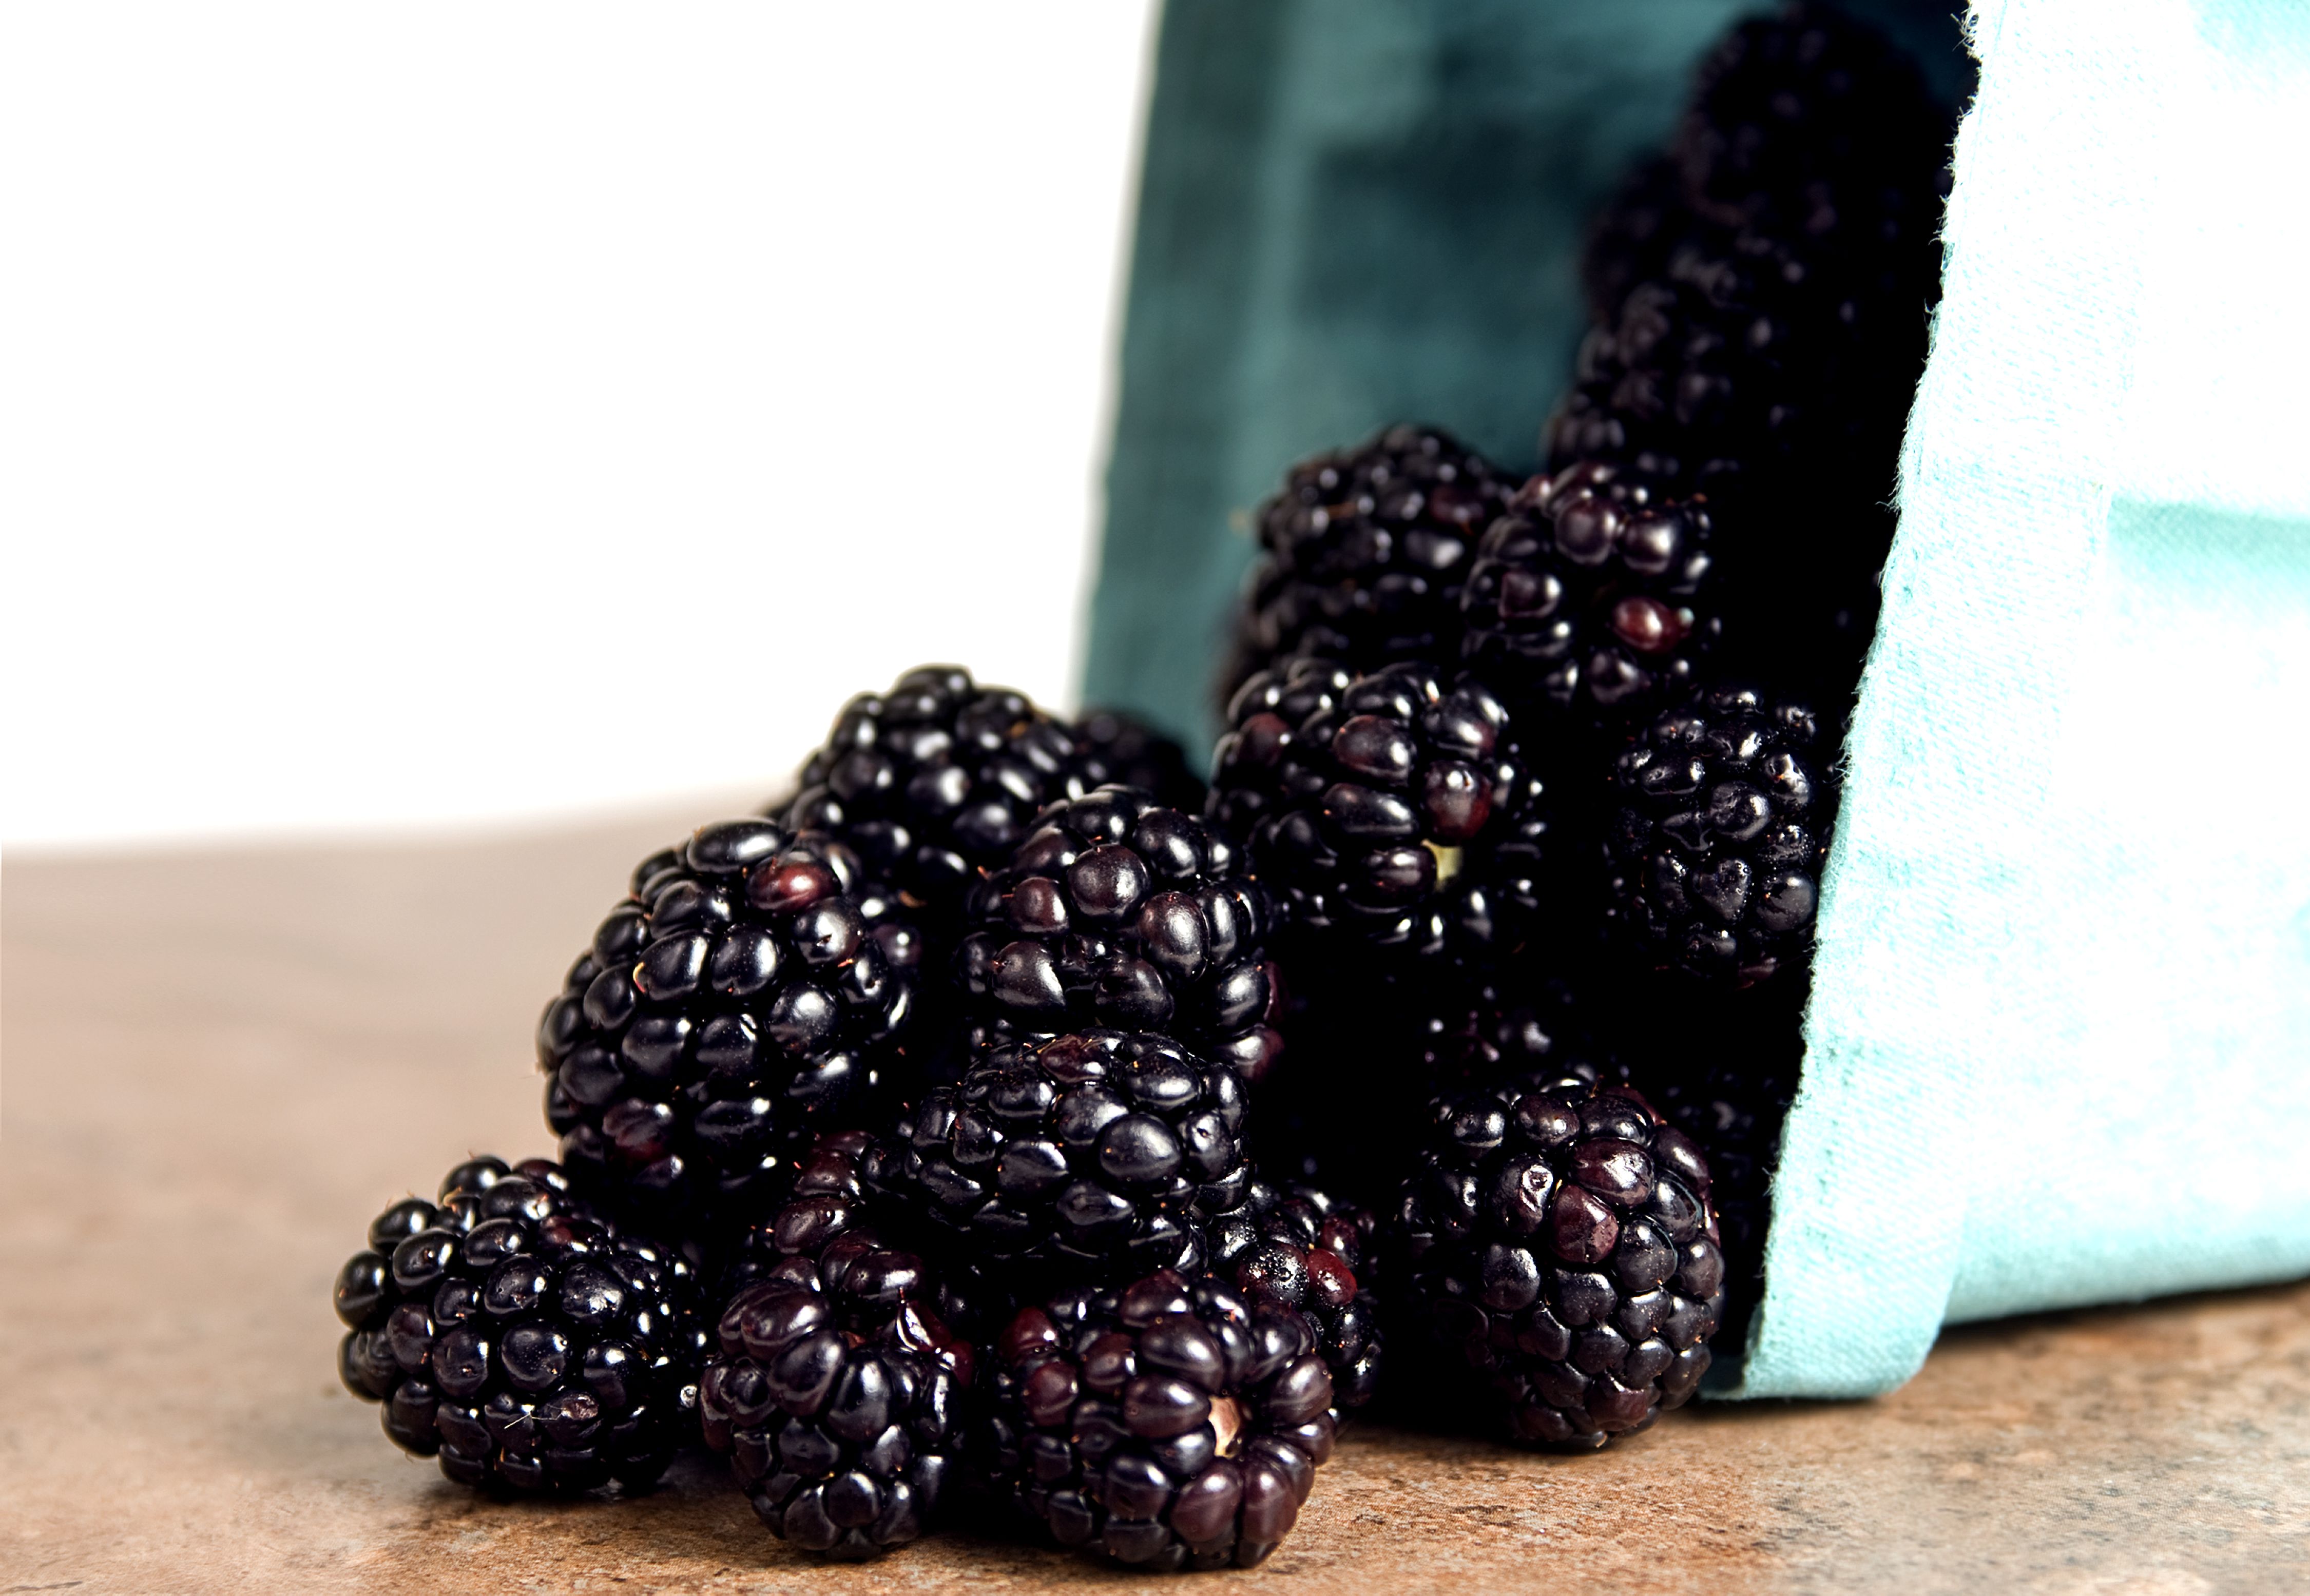 Free picture: container, blackberries, up-close, macro